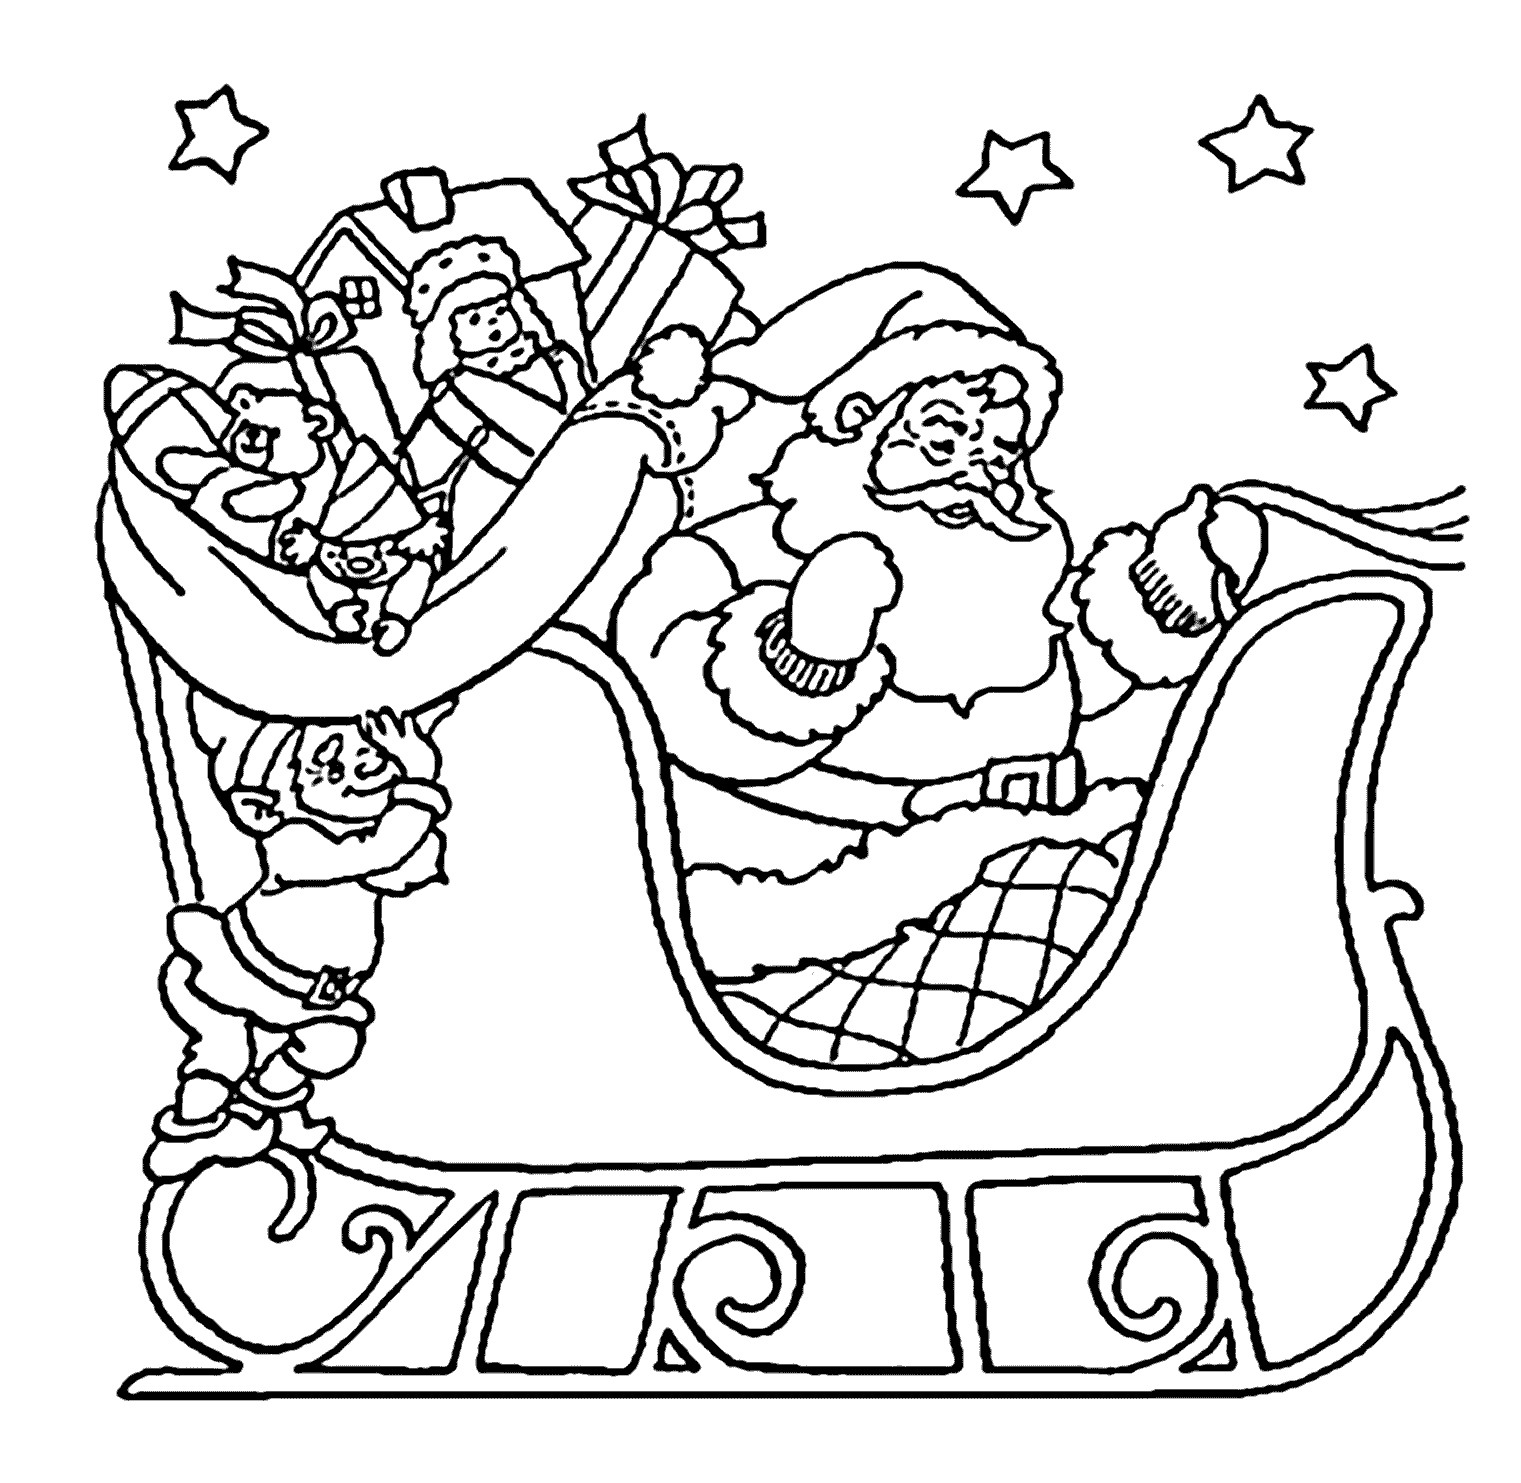 Printable Santa Coloring Pages
 Santa Coloring Pages Best Coloring Pages For Kids